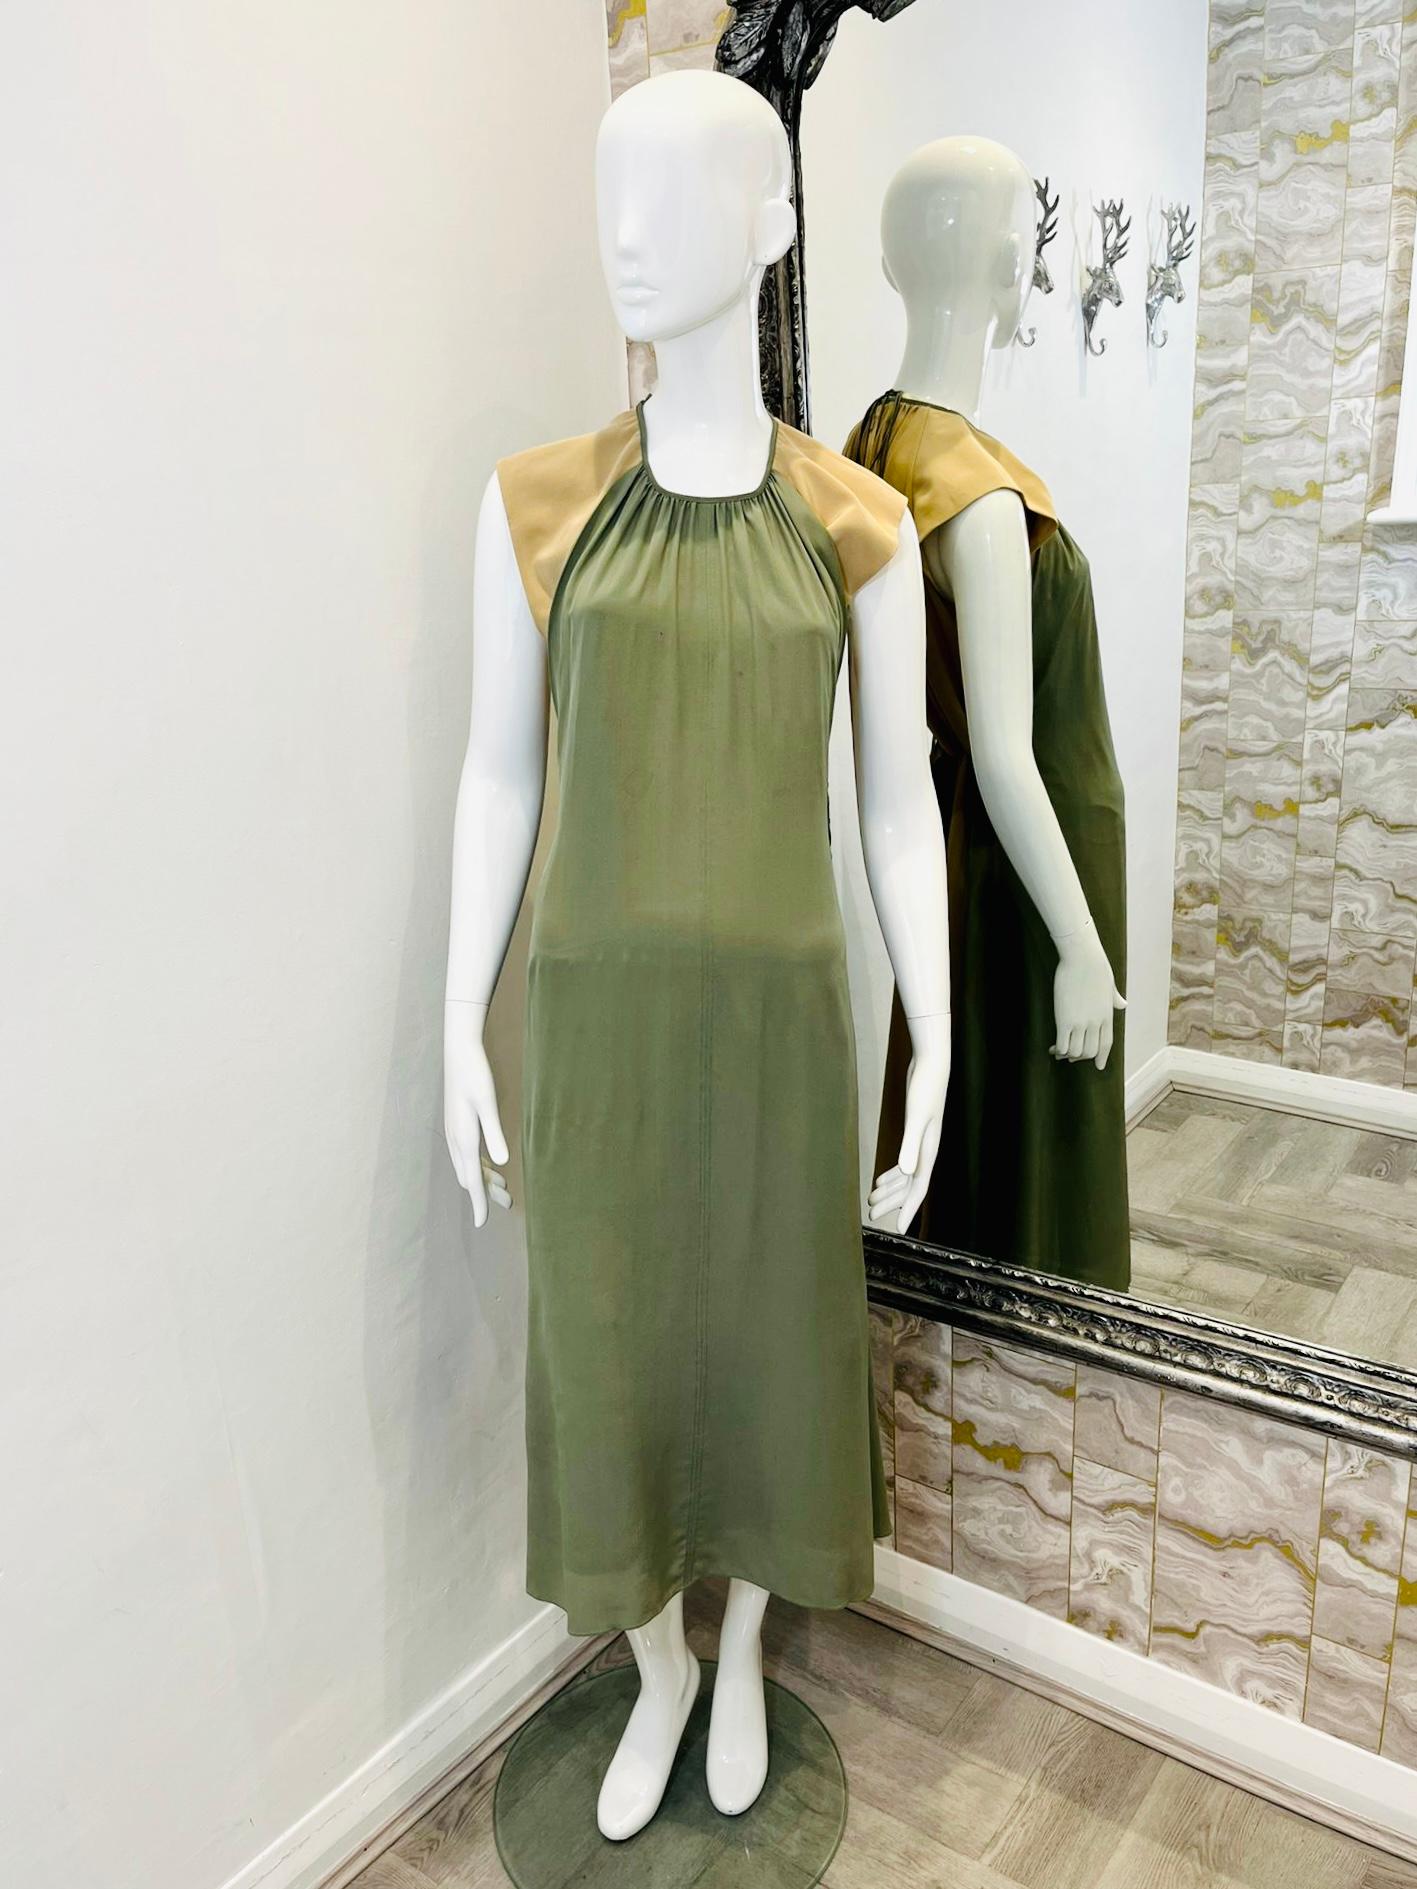 Chloe Silk Dress

Two tone in beige and khaki green, A- line style with cap sleeves and 

tie detail to the back of the neck and waist. Logo zipper pull.

Size - 40FR

Condition - Very Good

Composition - Silk 